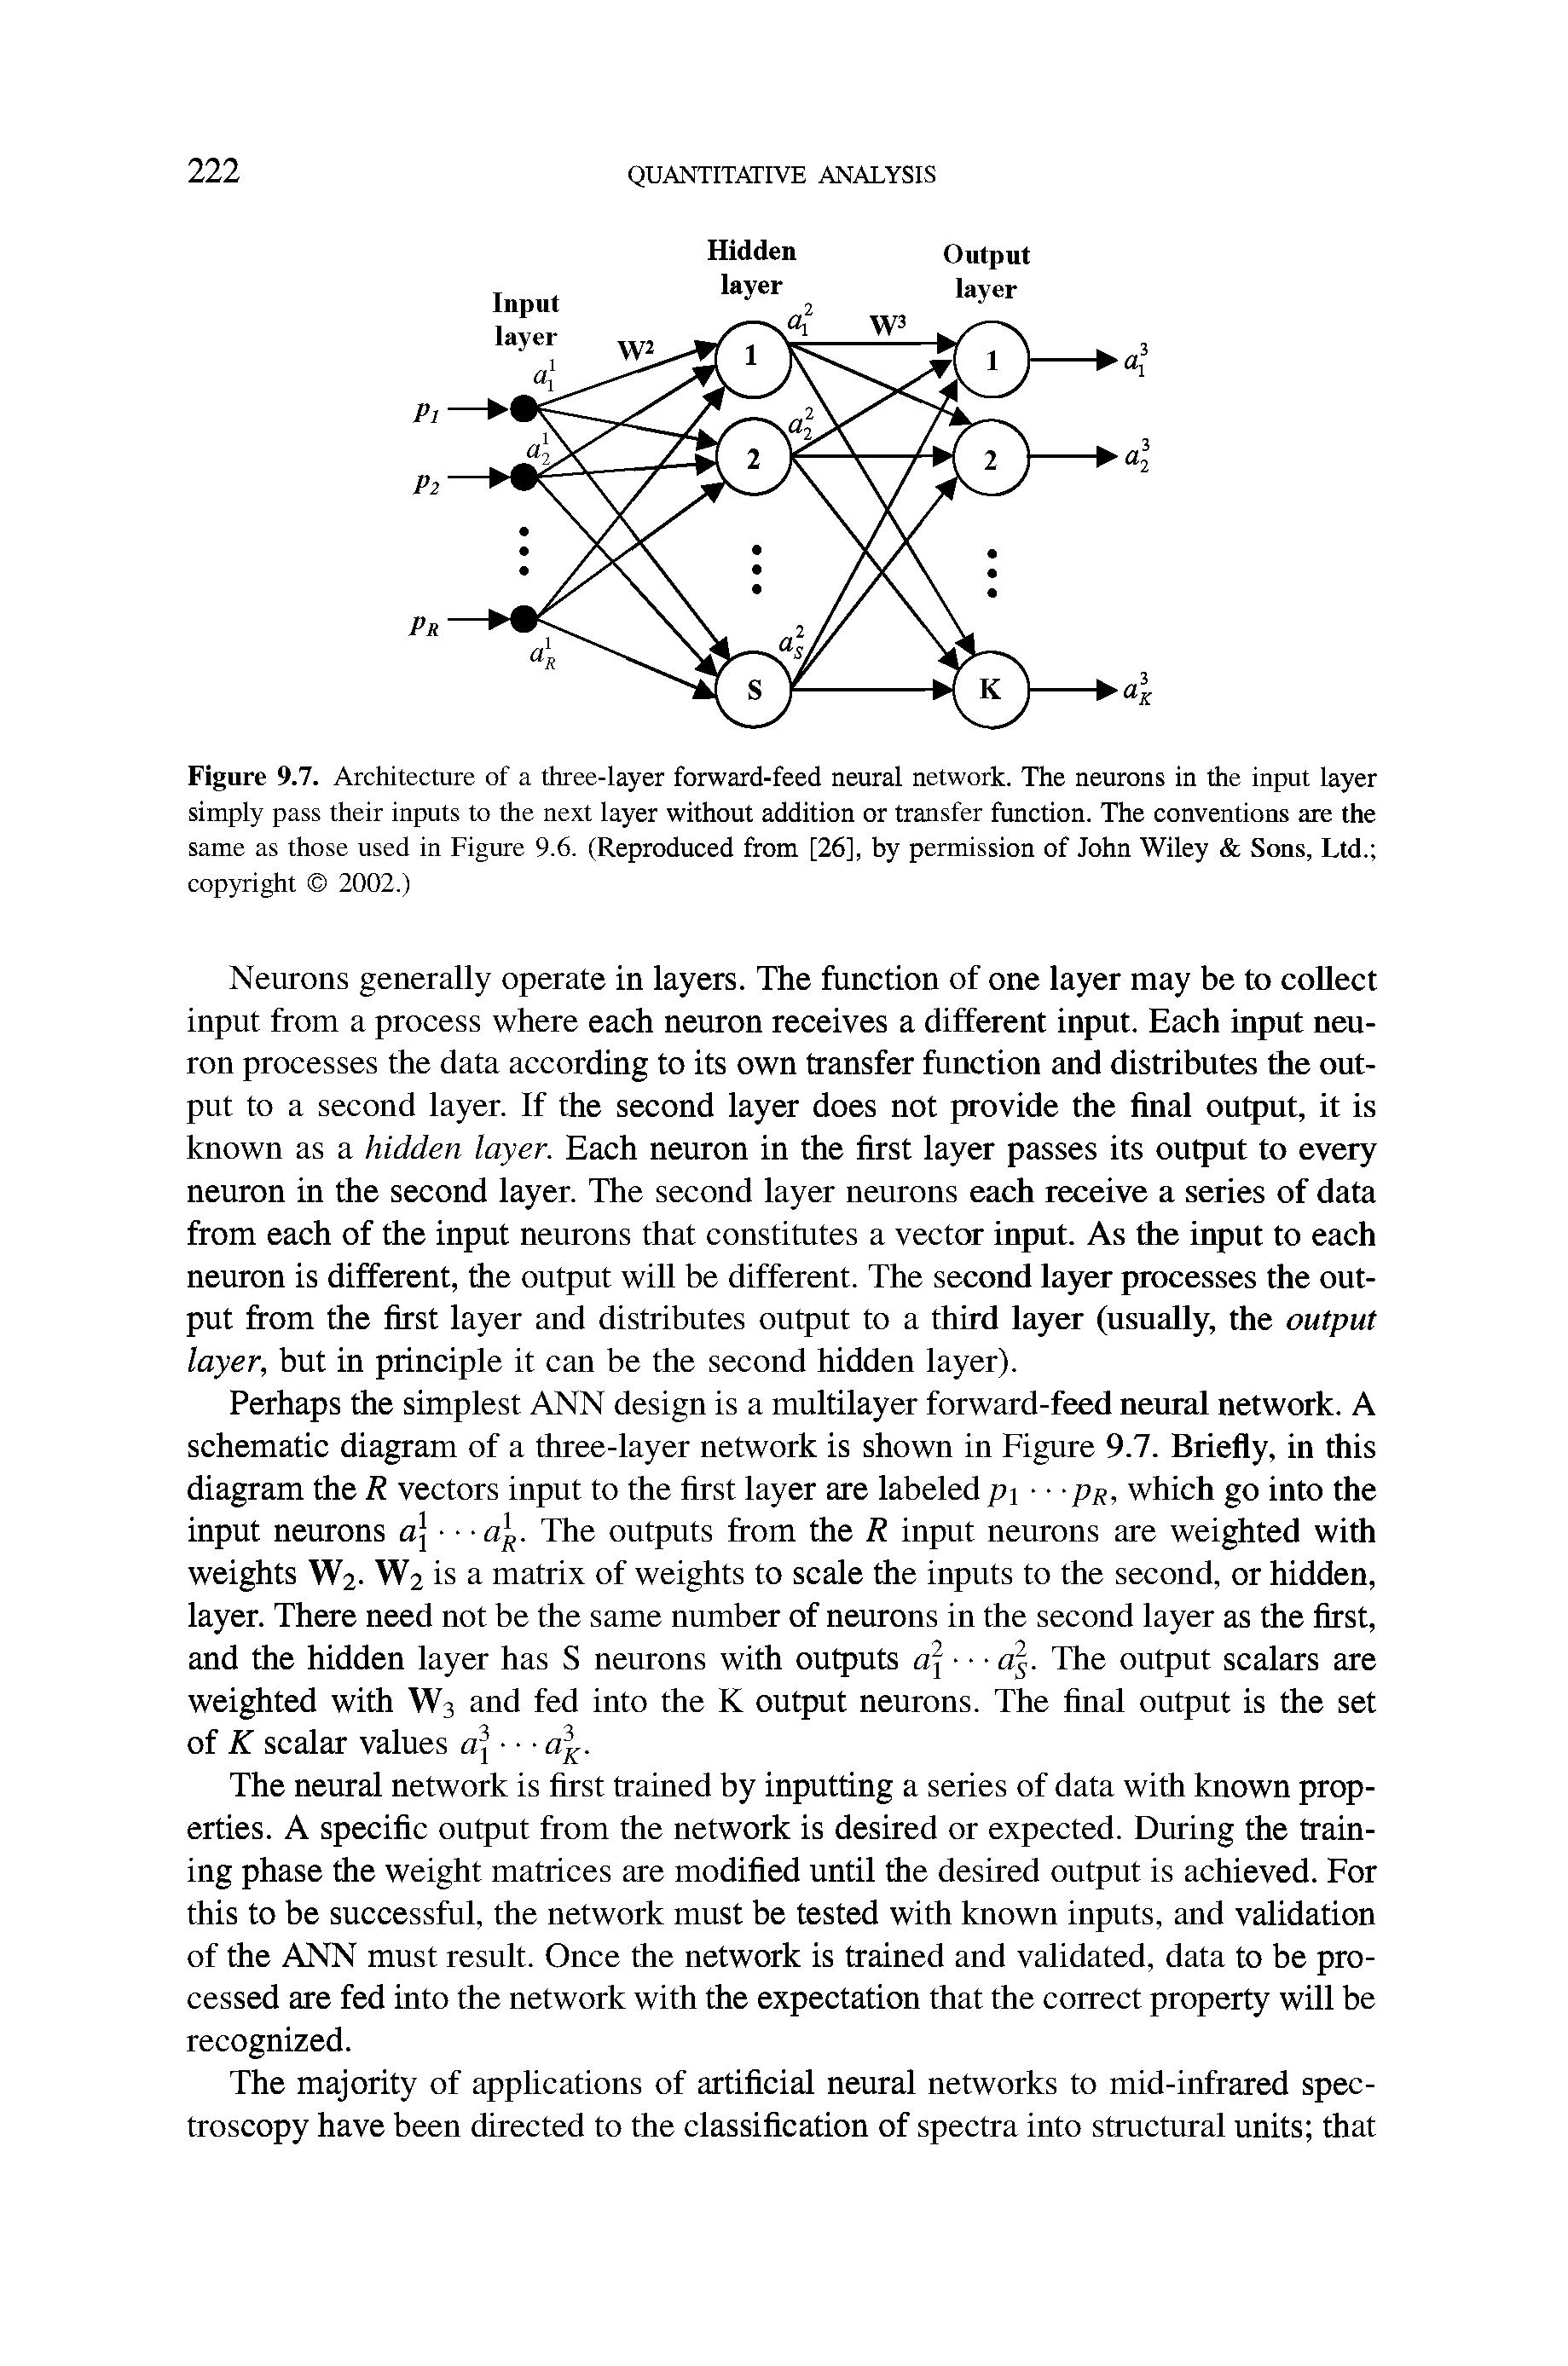 Figure 9.7. Architecture of a three-layer forward-feed neural network. The neurons in the input layer simply pass their inputs to the next layer without addition or transfer function. The conventions are the same as those used in Figure 9.6. (Reproduced from [26], by permission of John Wiley Sons, Ltd. copyright 2002.)...